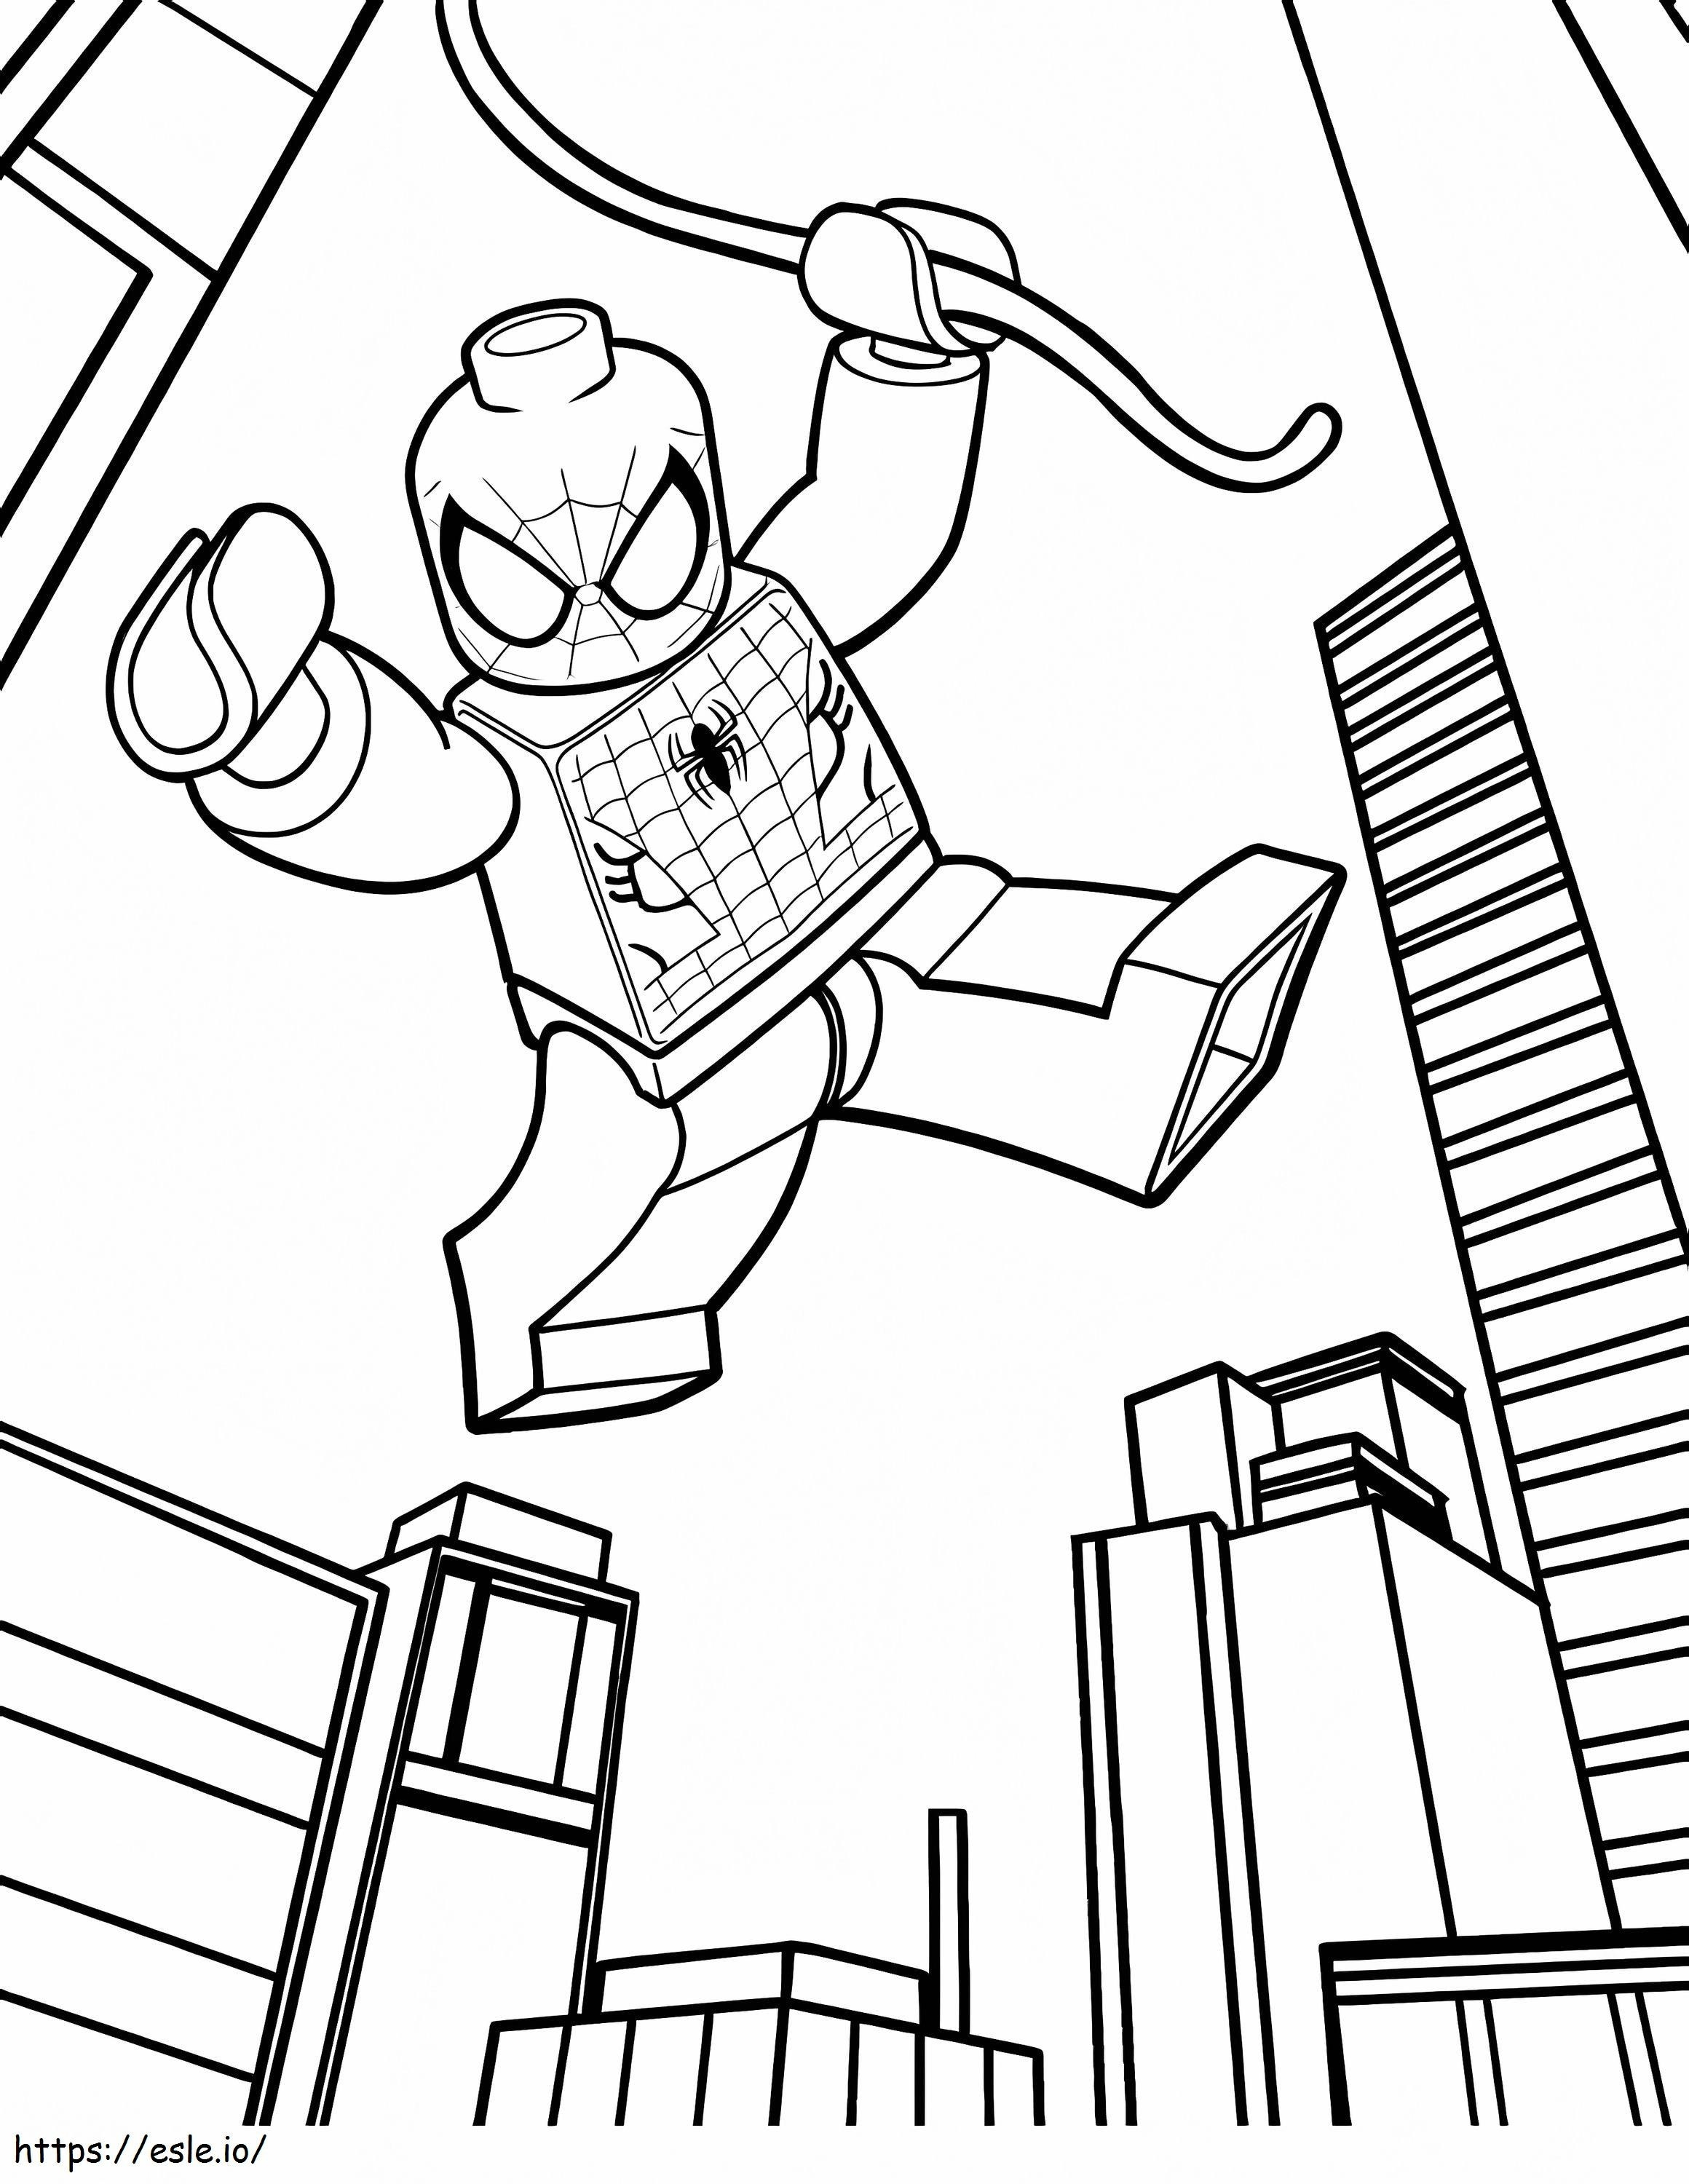 Cool Lego Spiderman coloring page